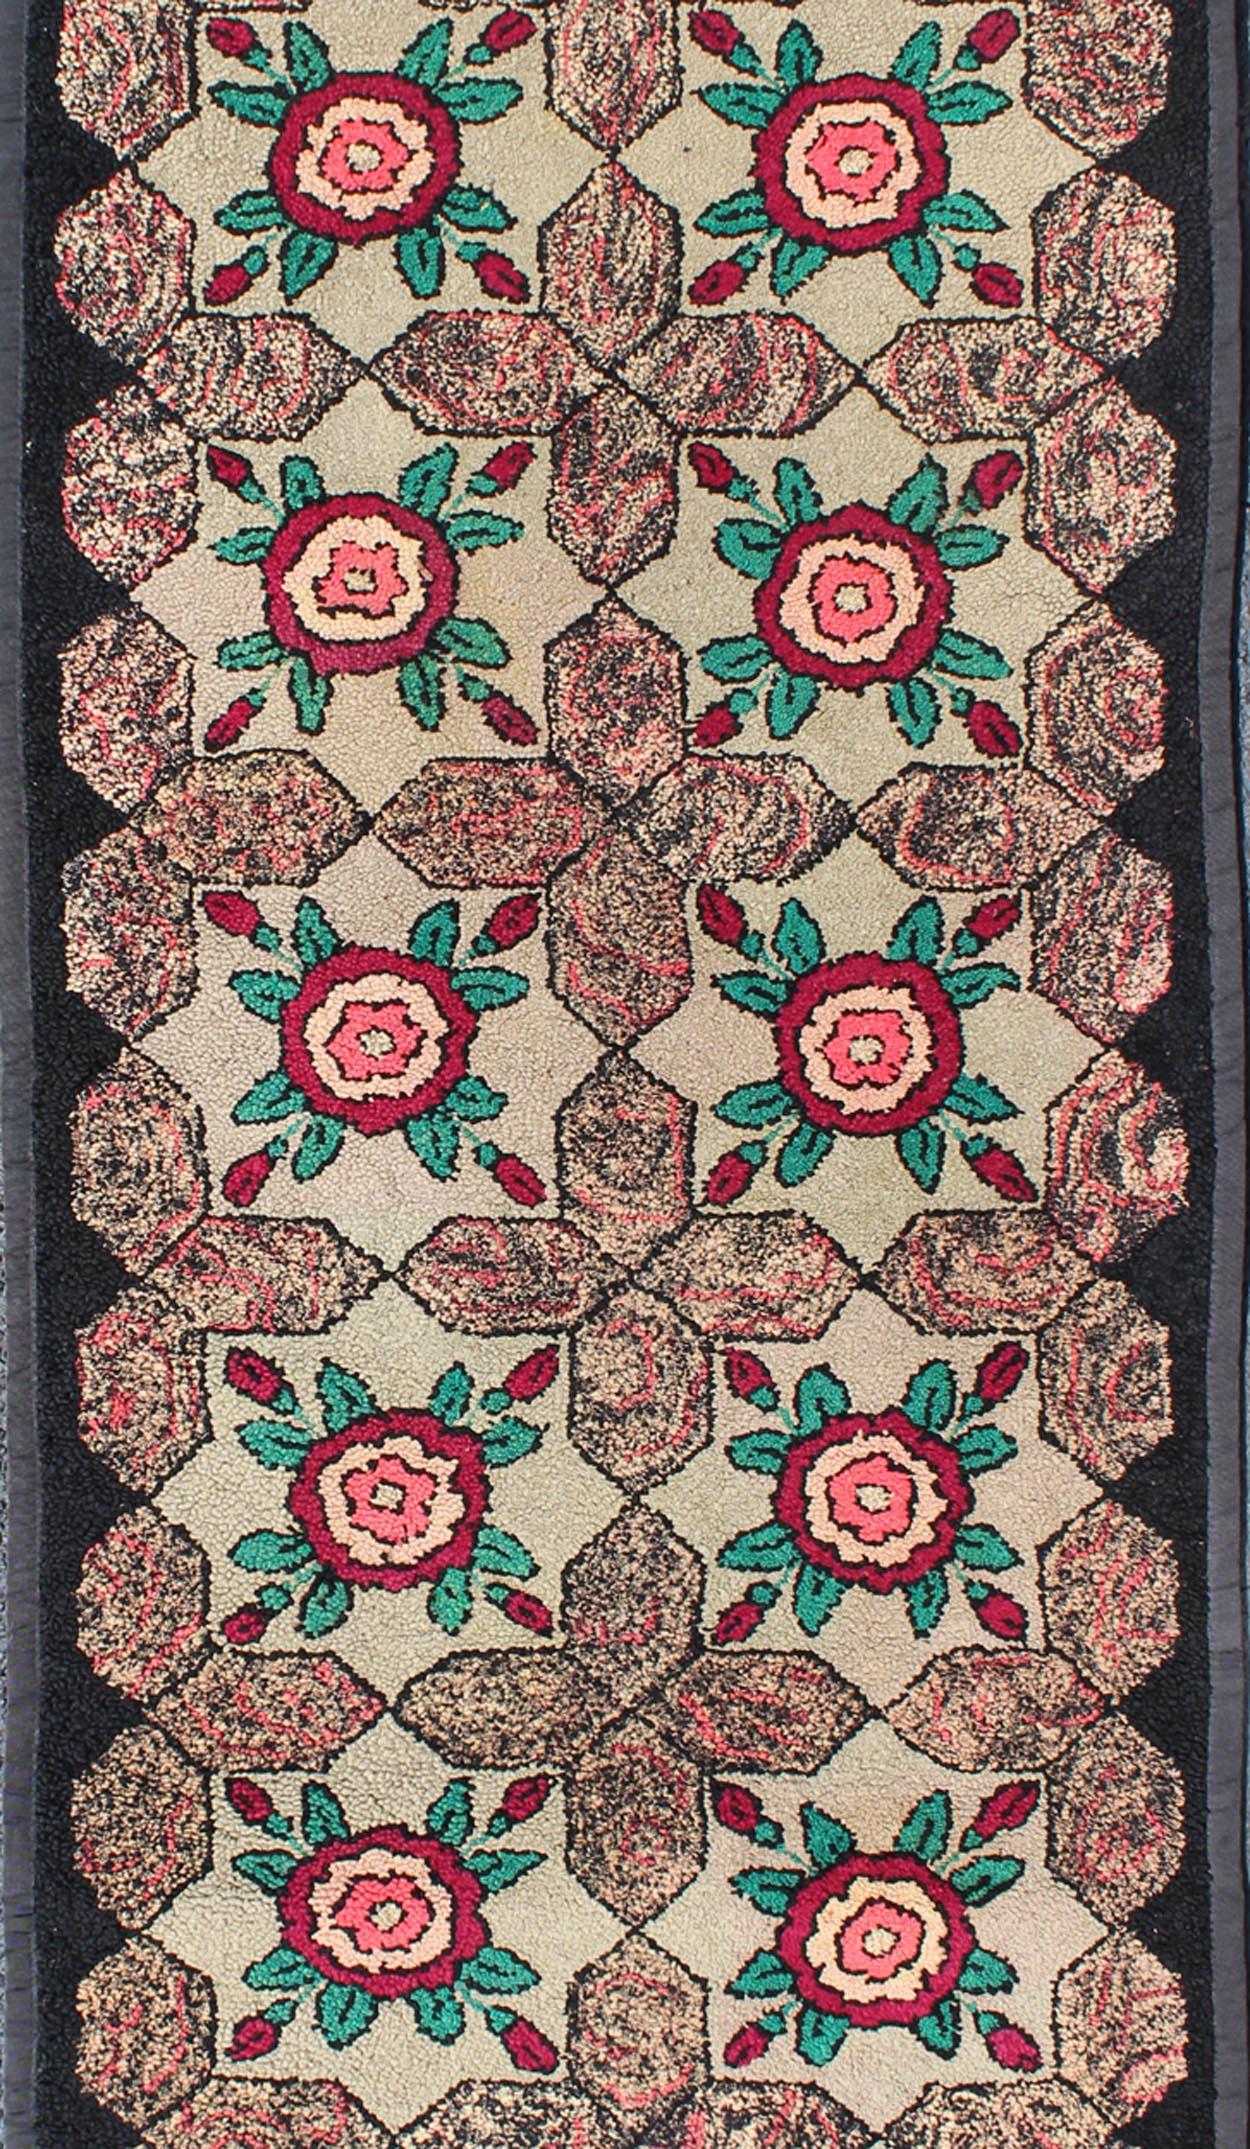 Floral antique American hooked rug with flower designs, rug G-0802, country of origin / type: United States / Hooked, circa 1910

Ingenious in style, color and composition, the features in this spectacular, antique American Hooked rug create an